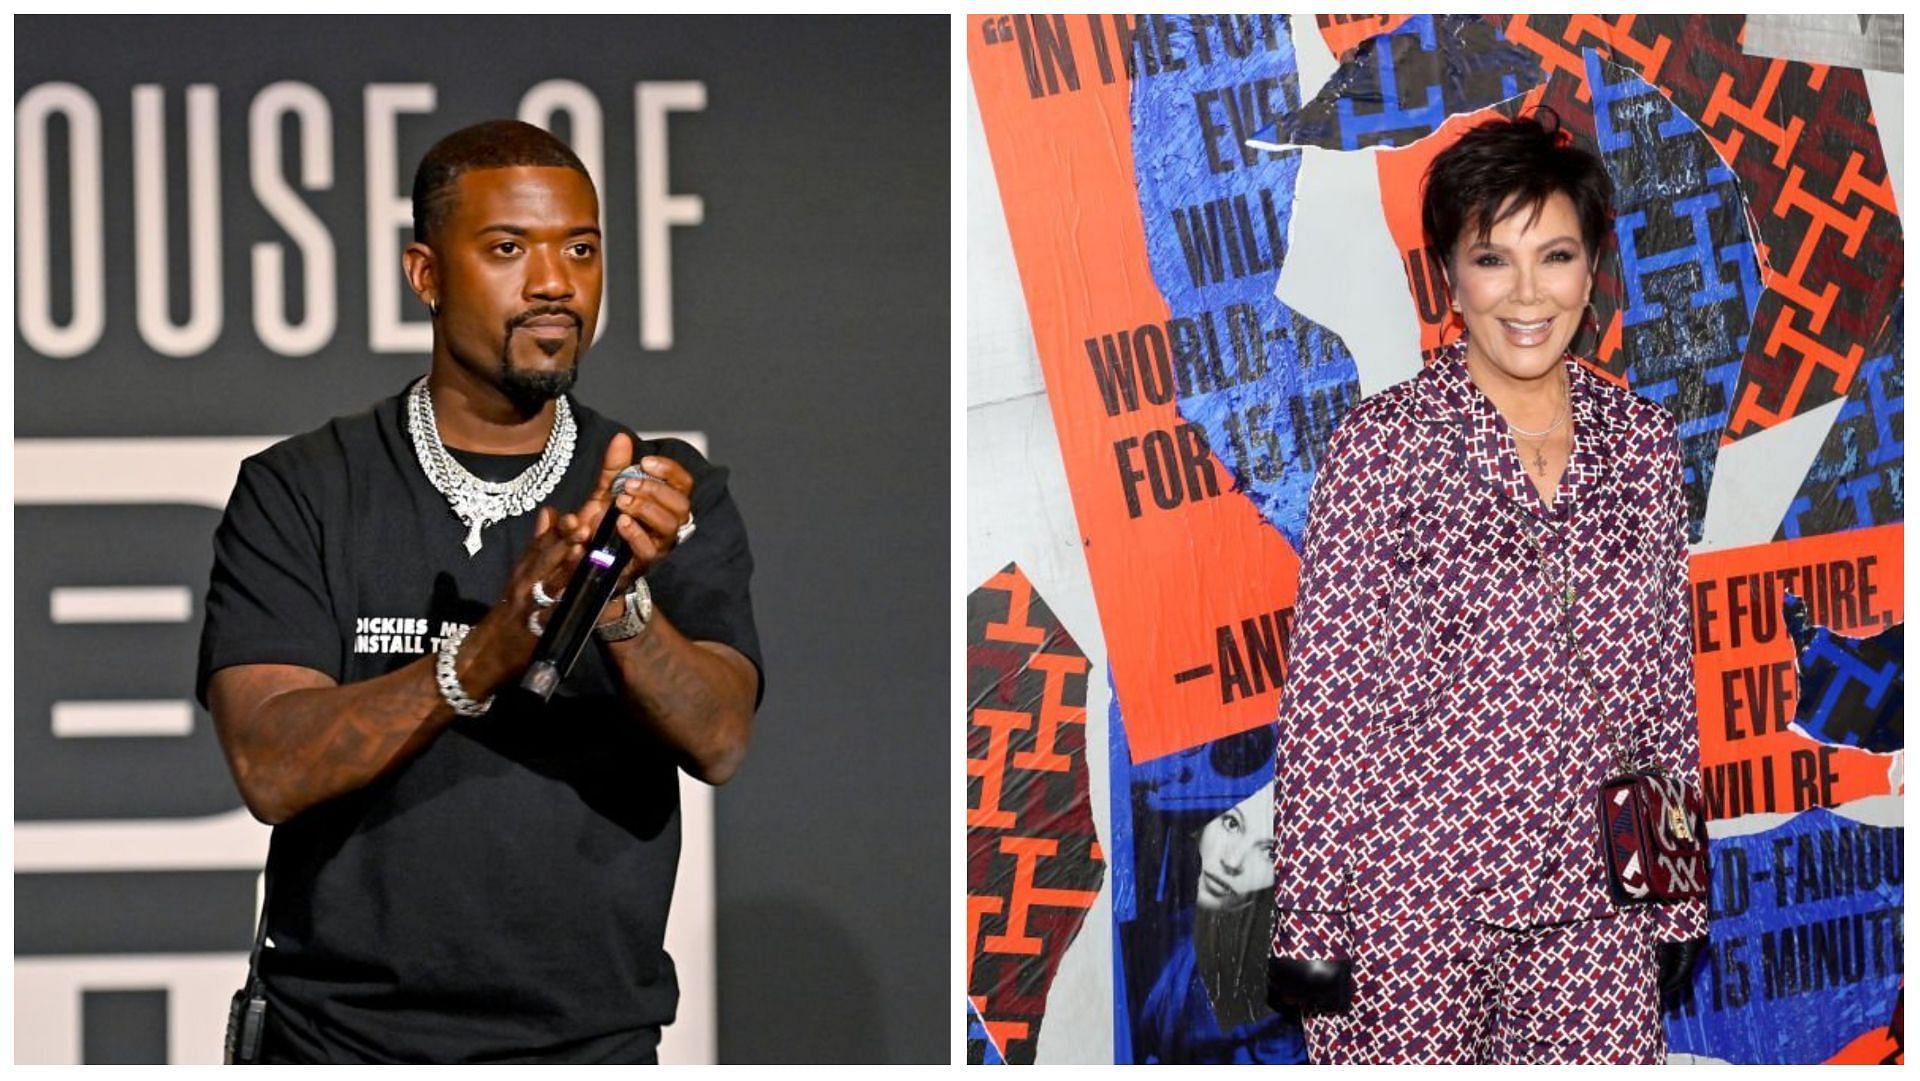 Ray J has been targeting Kris Jenner claiming that she ruined his family life (Images via Paras Griffin and Rob Kim/Getty Images)